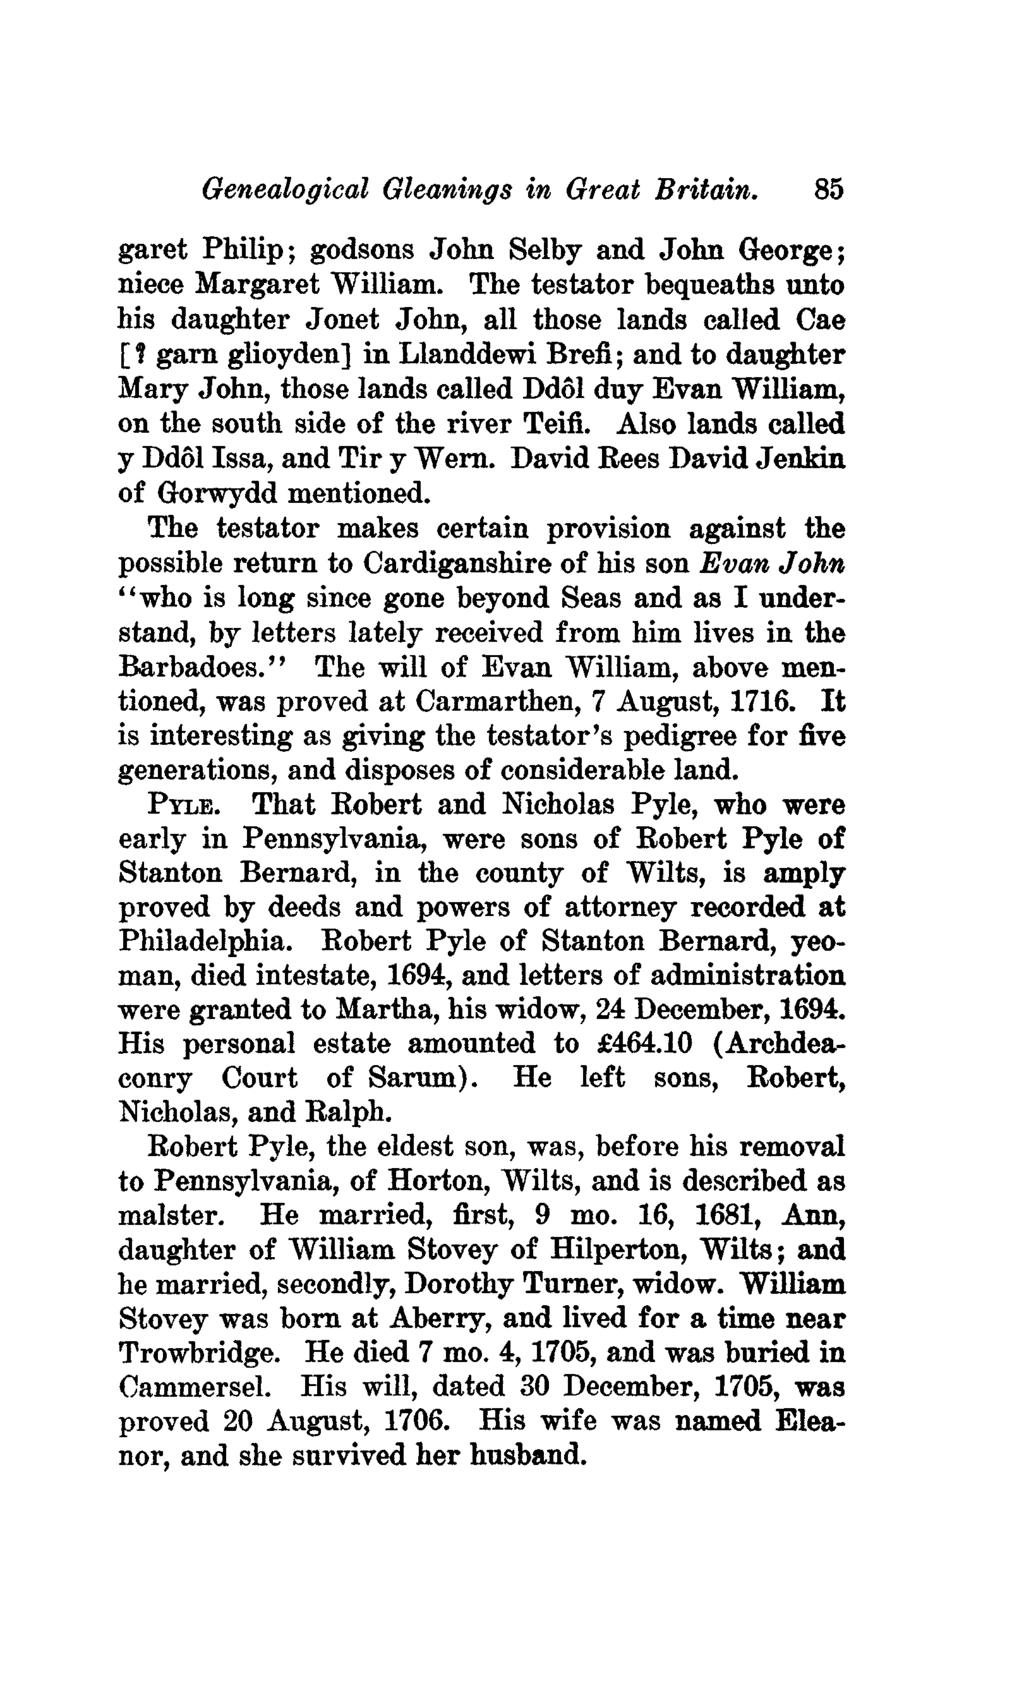 Genealogical Gleanings in Great Britain. 85 garet Philip; godsons John Selby and John George; niece Margaret William. The testator bequeaths unto his daughter Jonet John, all those lands called Cae [?